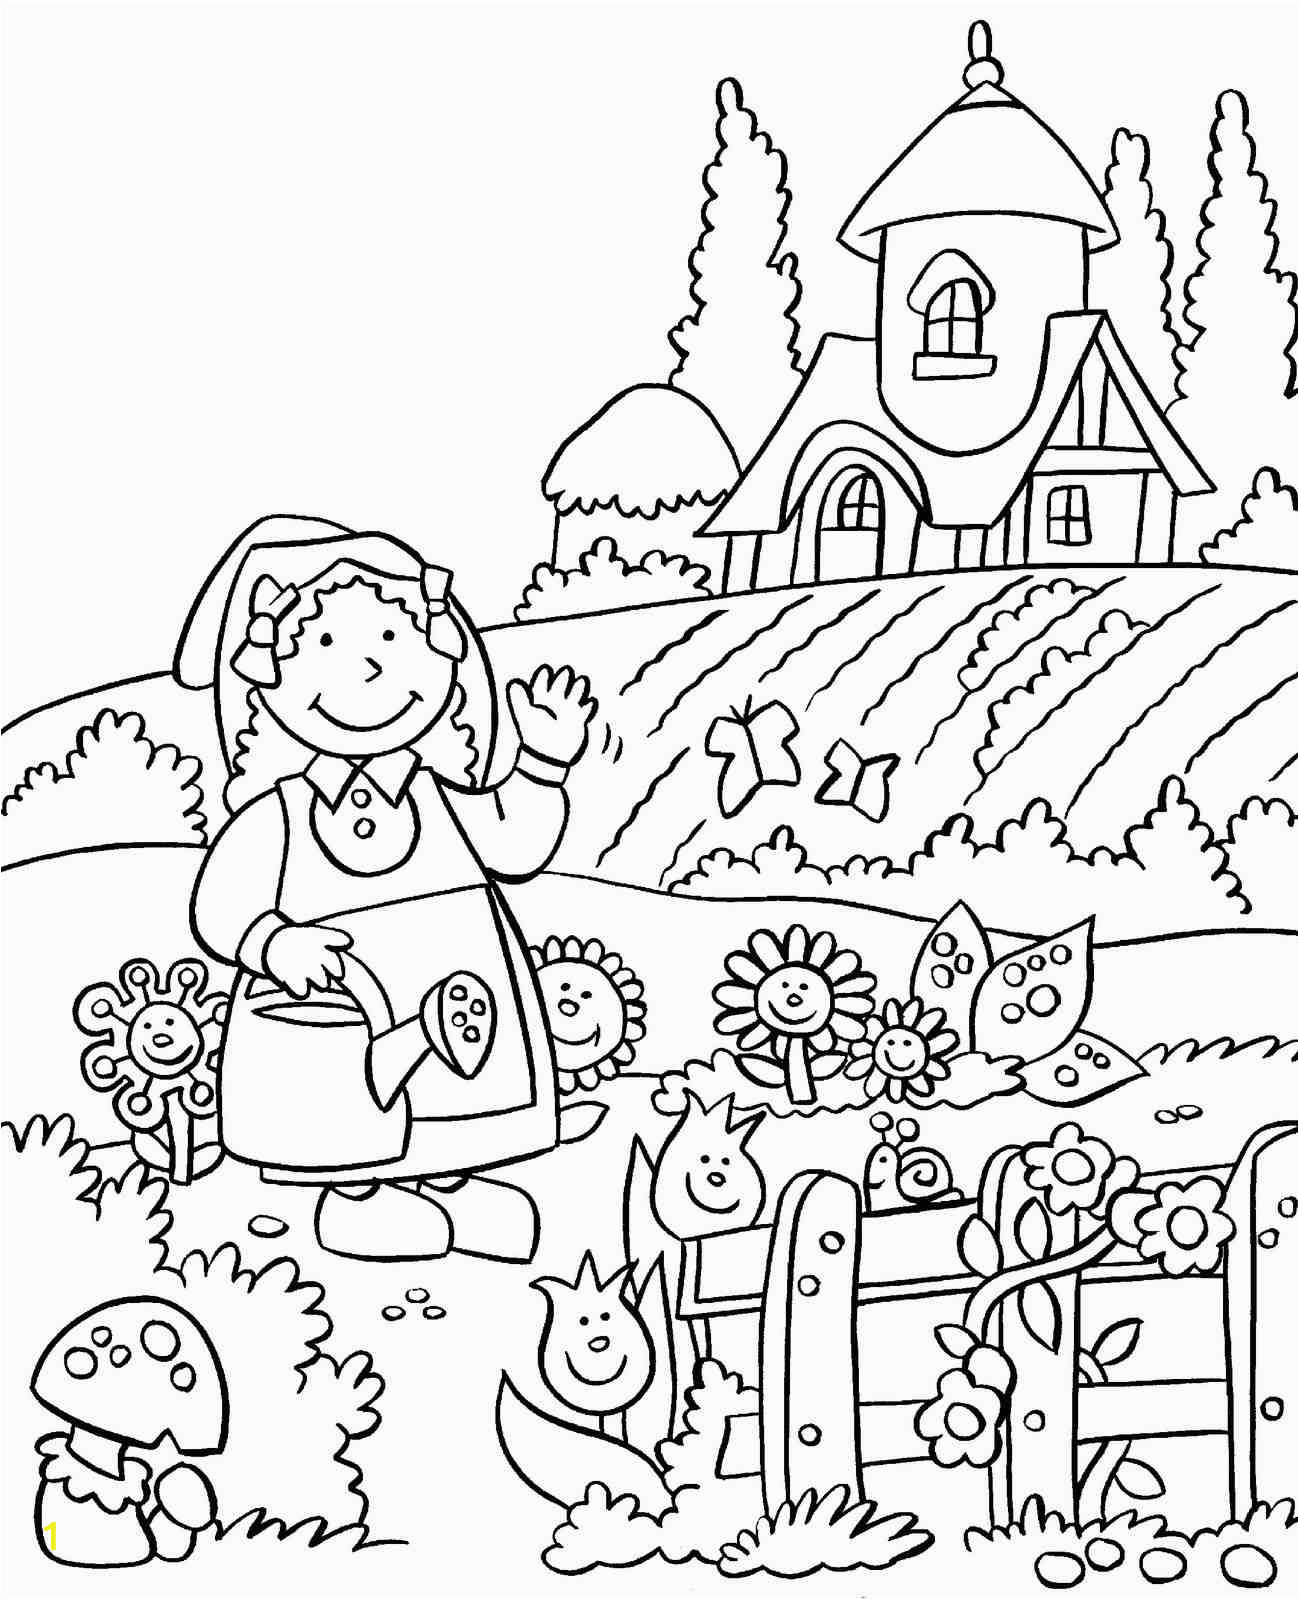 horticulture coloring pages flower garden coloring pages to and print for free coloring horticulture pages